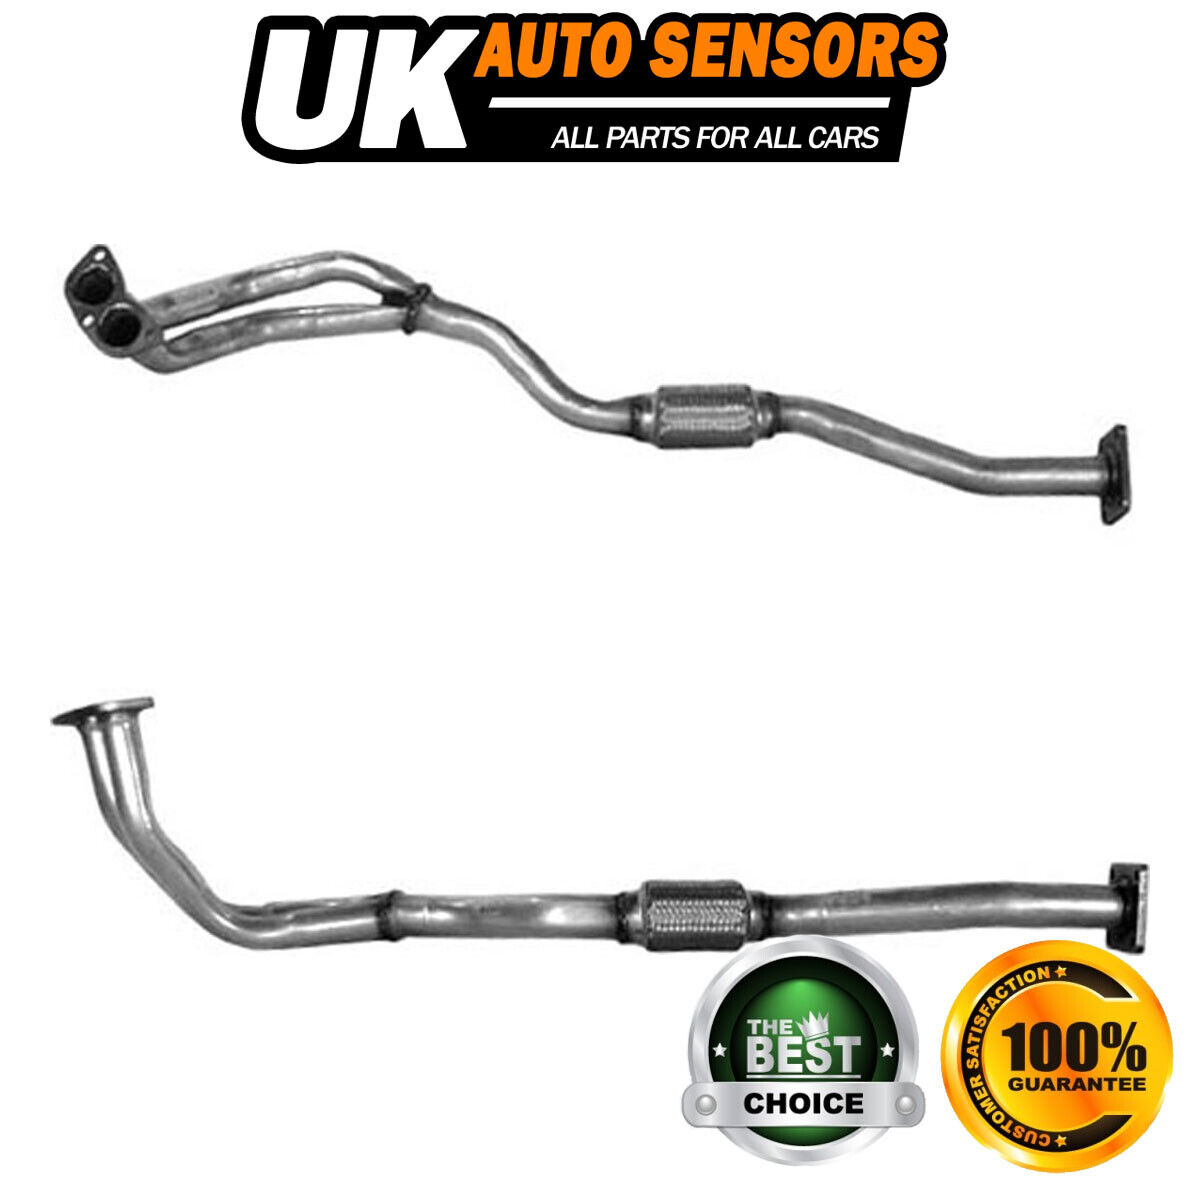 Fits Daewoo Nexia 1995-1996 1.5 Exhaust Pipe Euro 2 Front AST #1 96121348